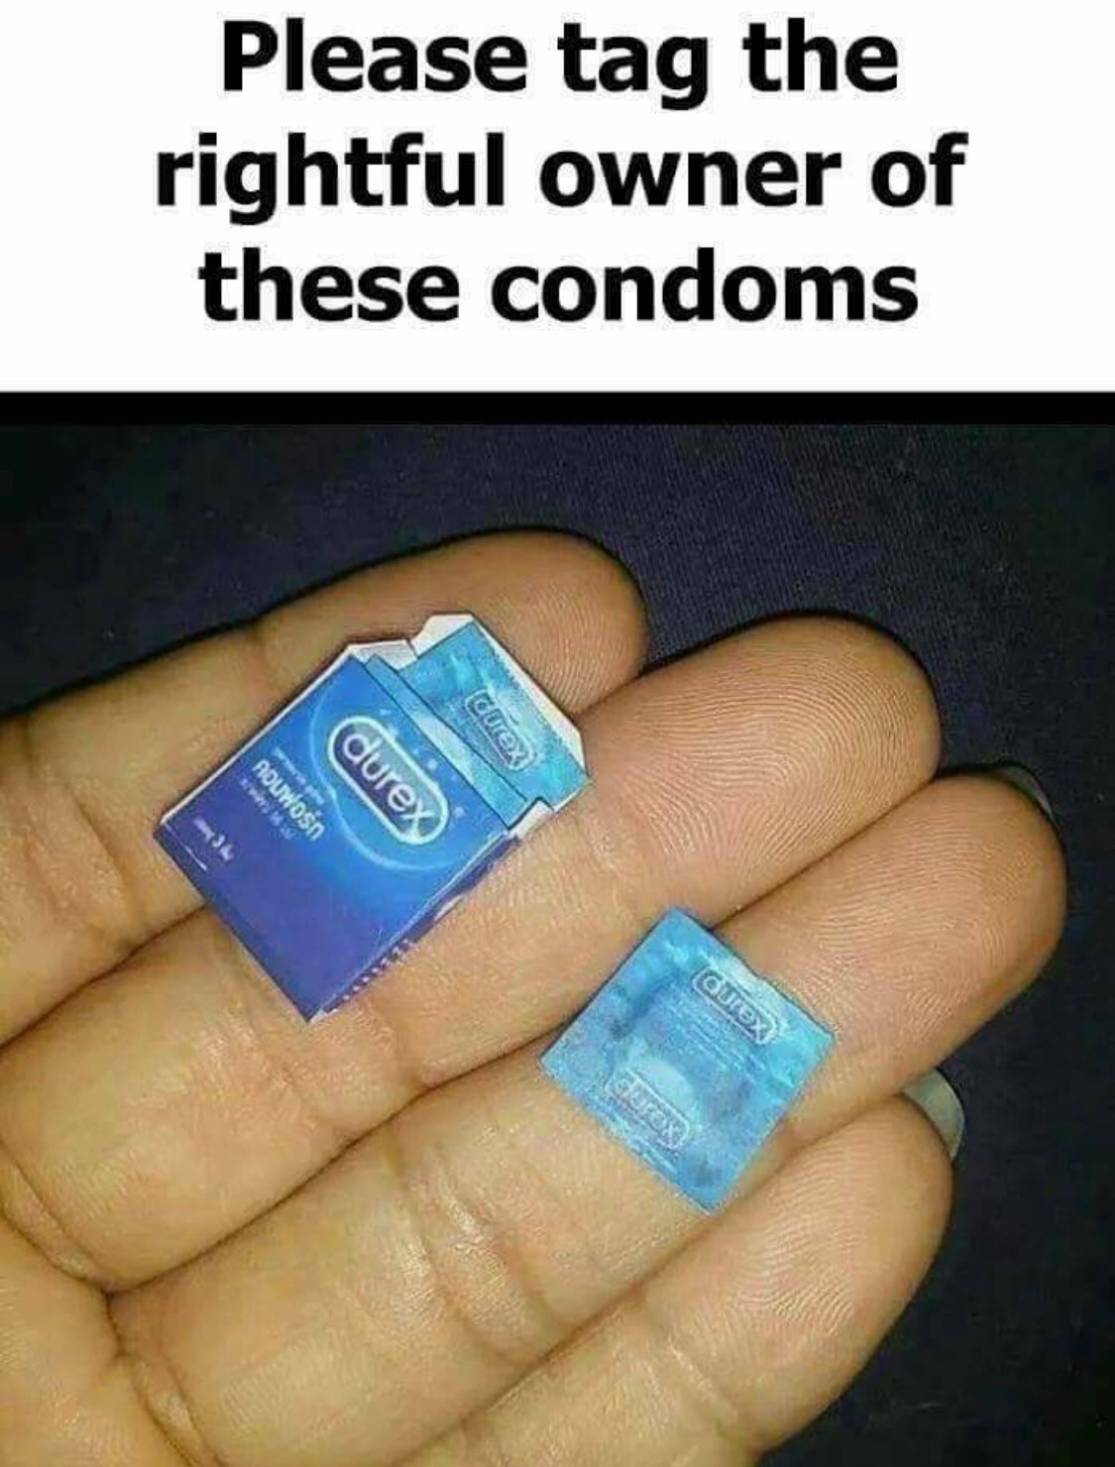 gal alto casertano - Please tag the rightful owner of these condoms Eurex Aolhos durex Qurex